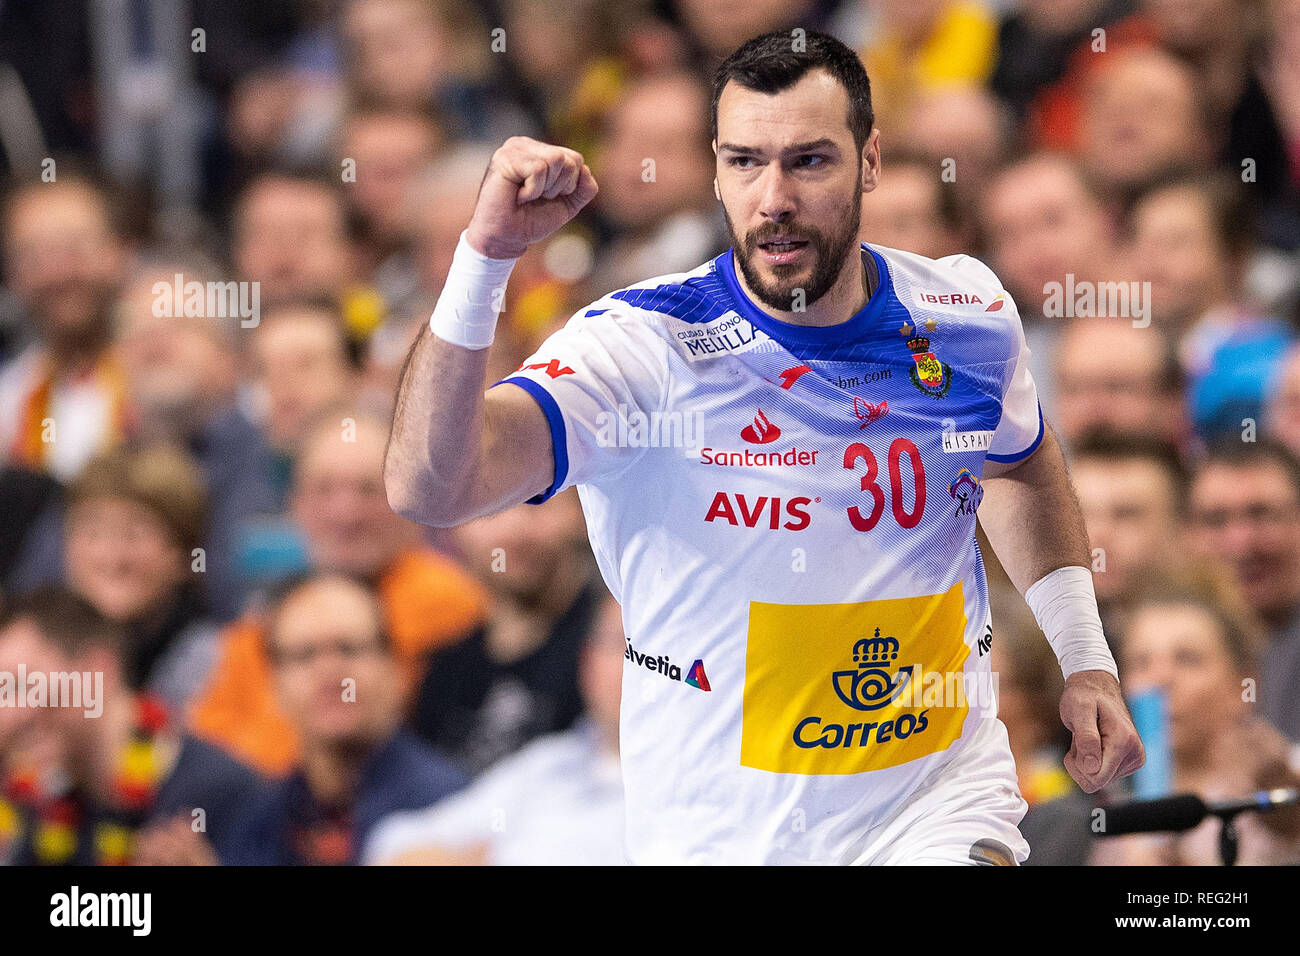 Cologne, Germany. 21st January 2019.Handball: WM, Spain - Brazil, main round, group 1, 2nd matchday. Spain's Gedeon Guardiola cheers for a goal. Photo: Marius Becker/dpa Credit: dpa picture alliance/Alamy Live News Stock Photo